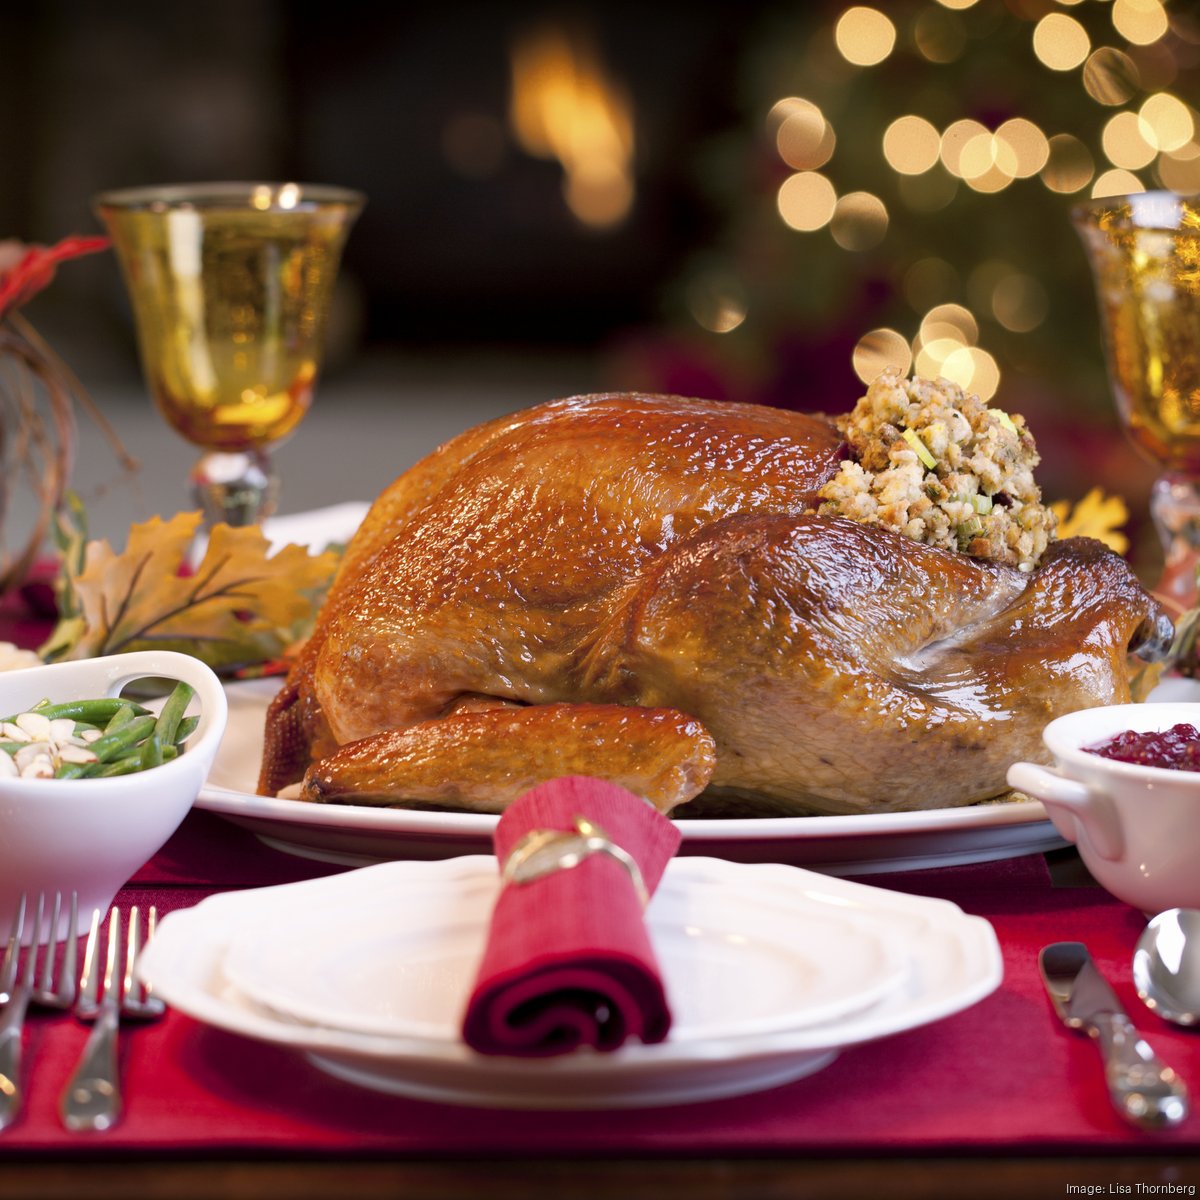 AWARD WINNING Dano's Thanksgiving Turkey! It's time to order your Dano's  tonight and impress your family! Be the star…